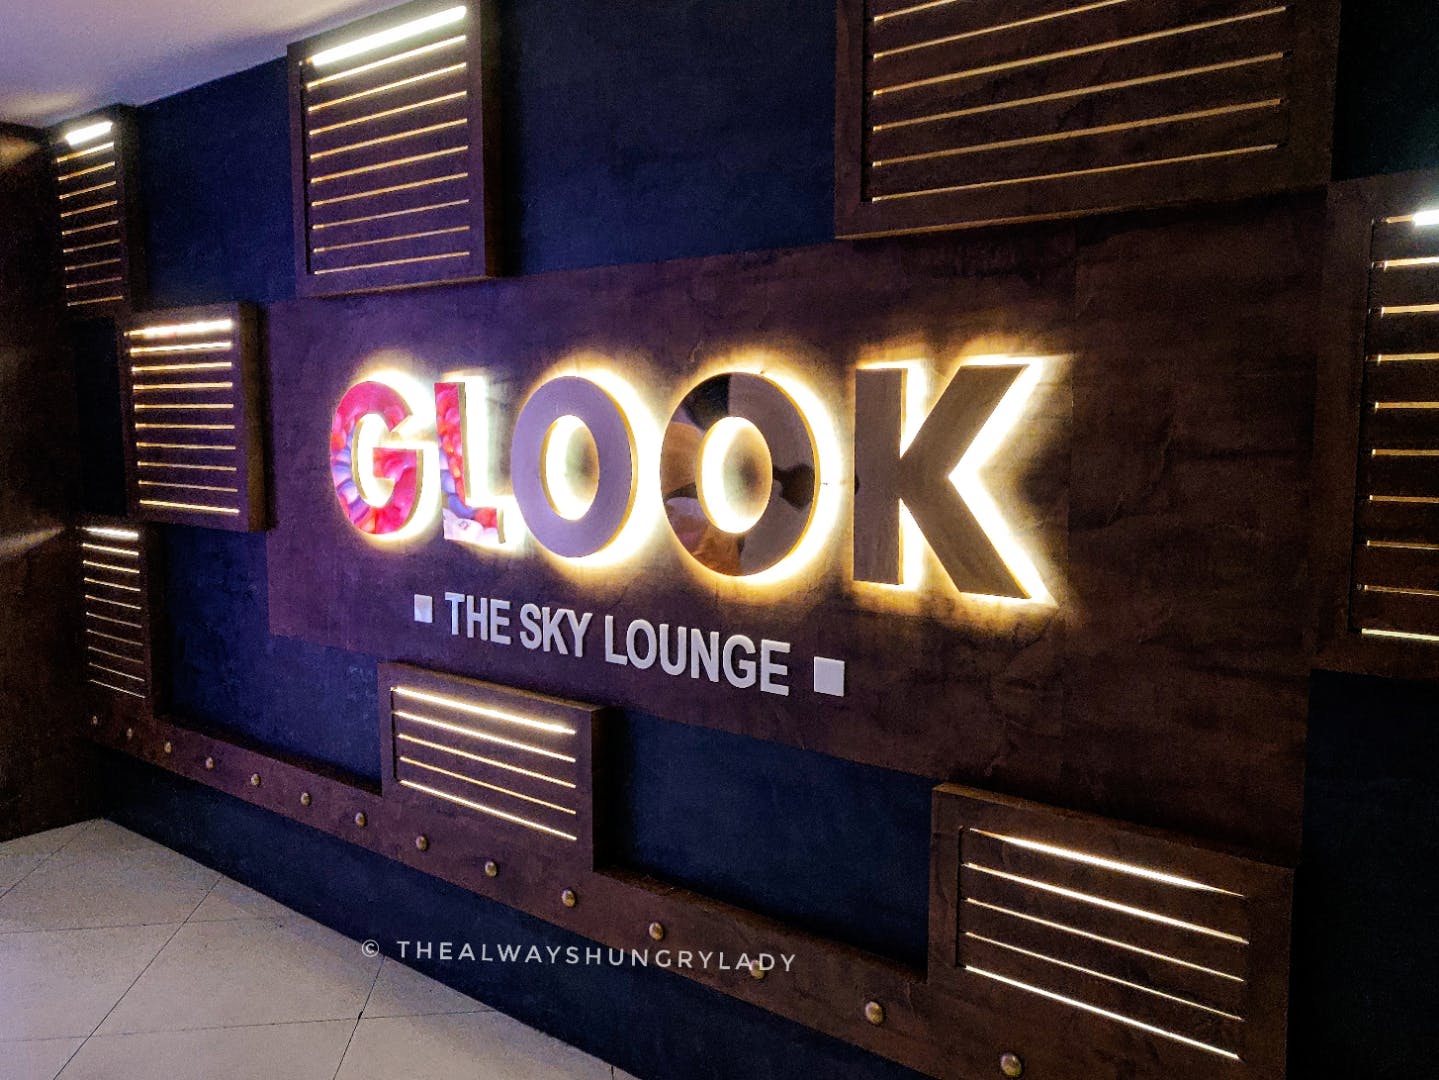 Plan a romantic date or an exquisite family get together or party with your friends under one roof at Glook